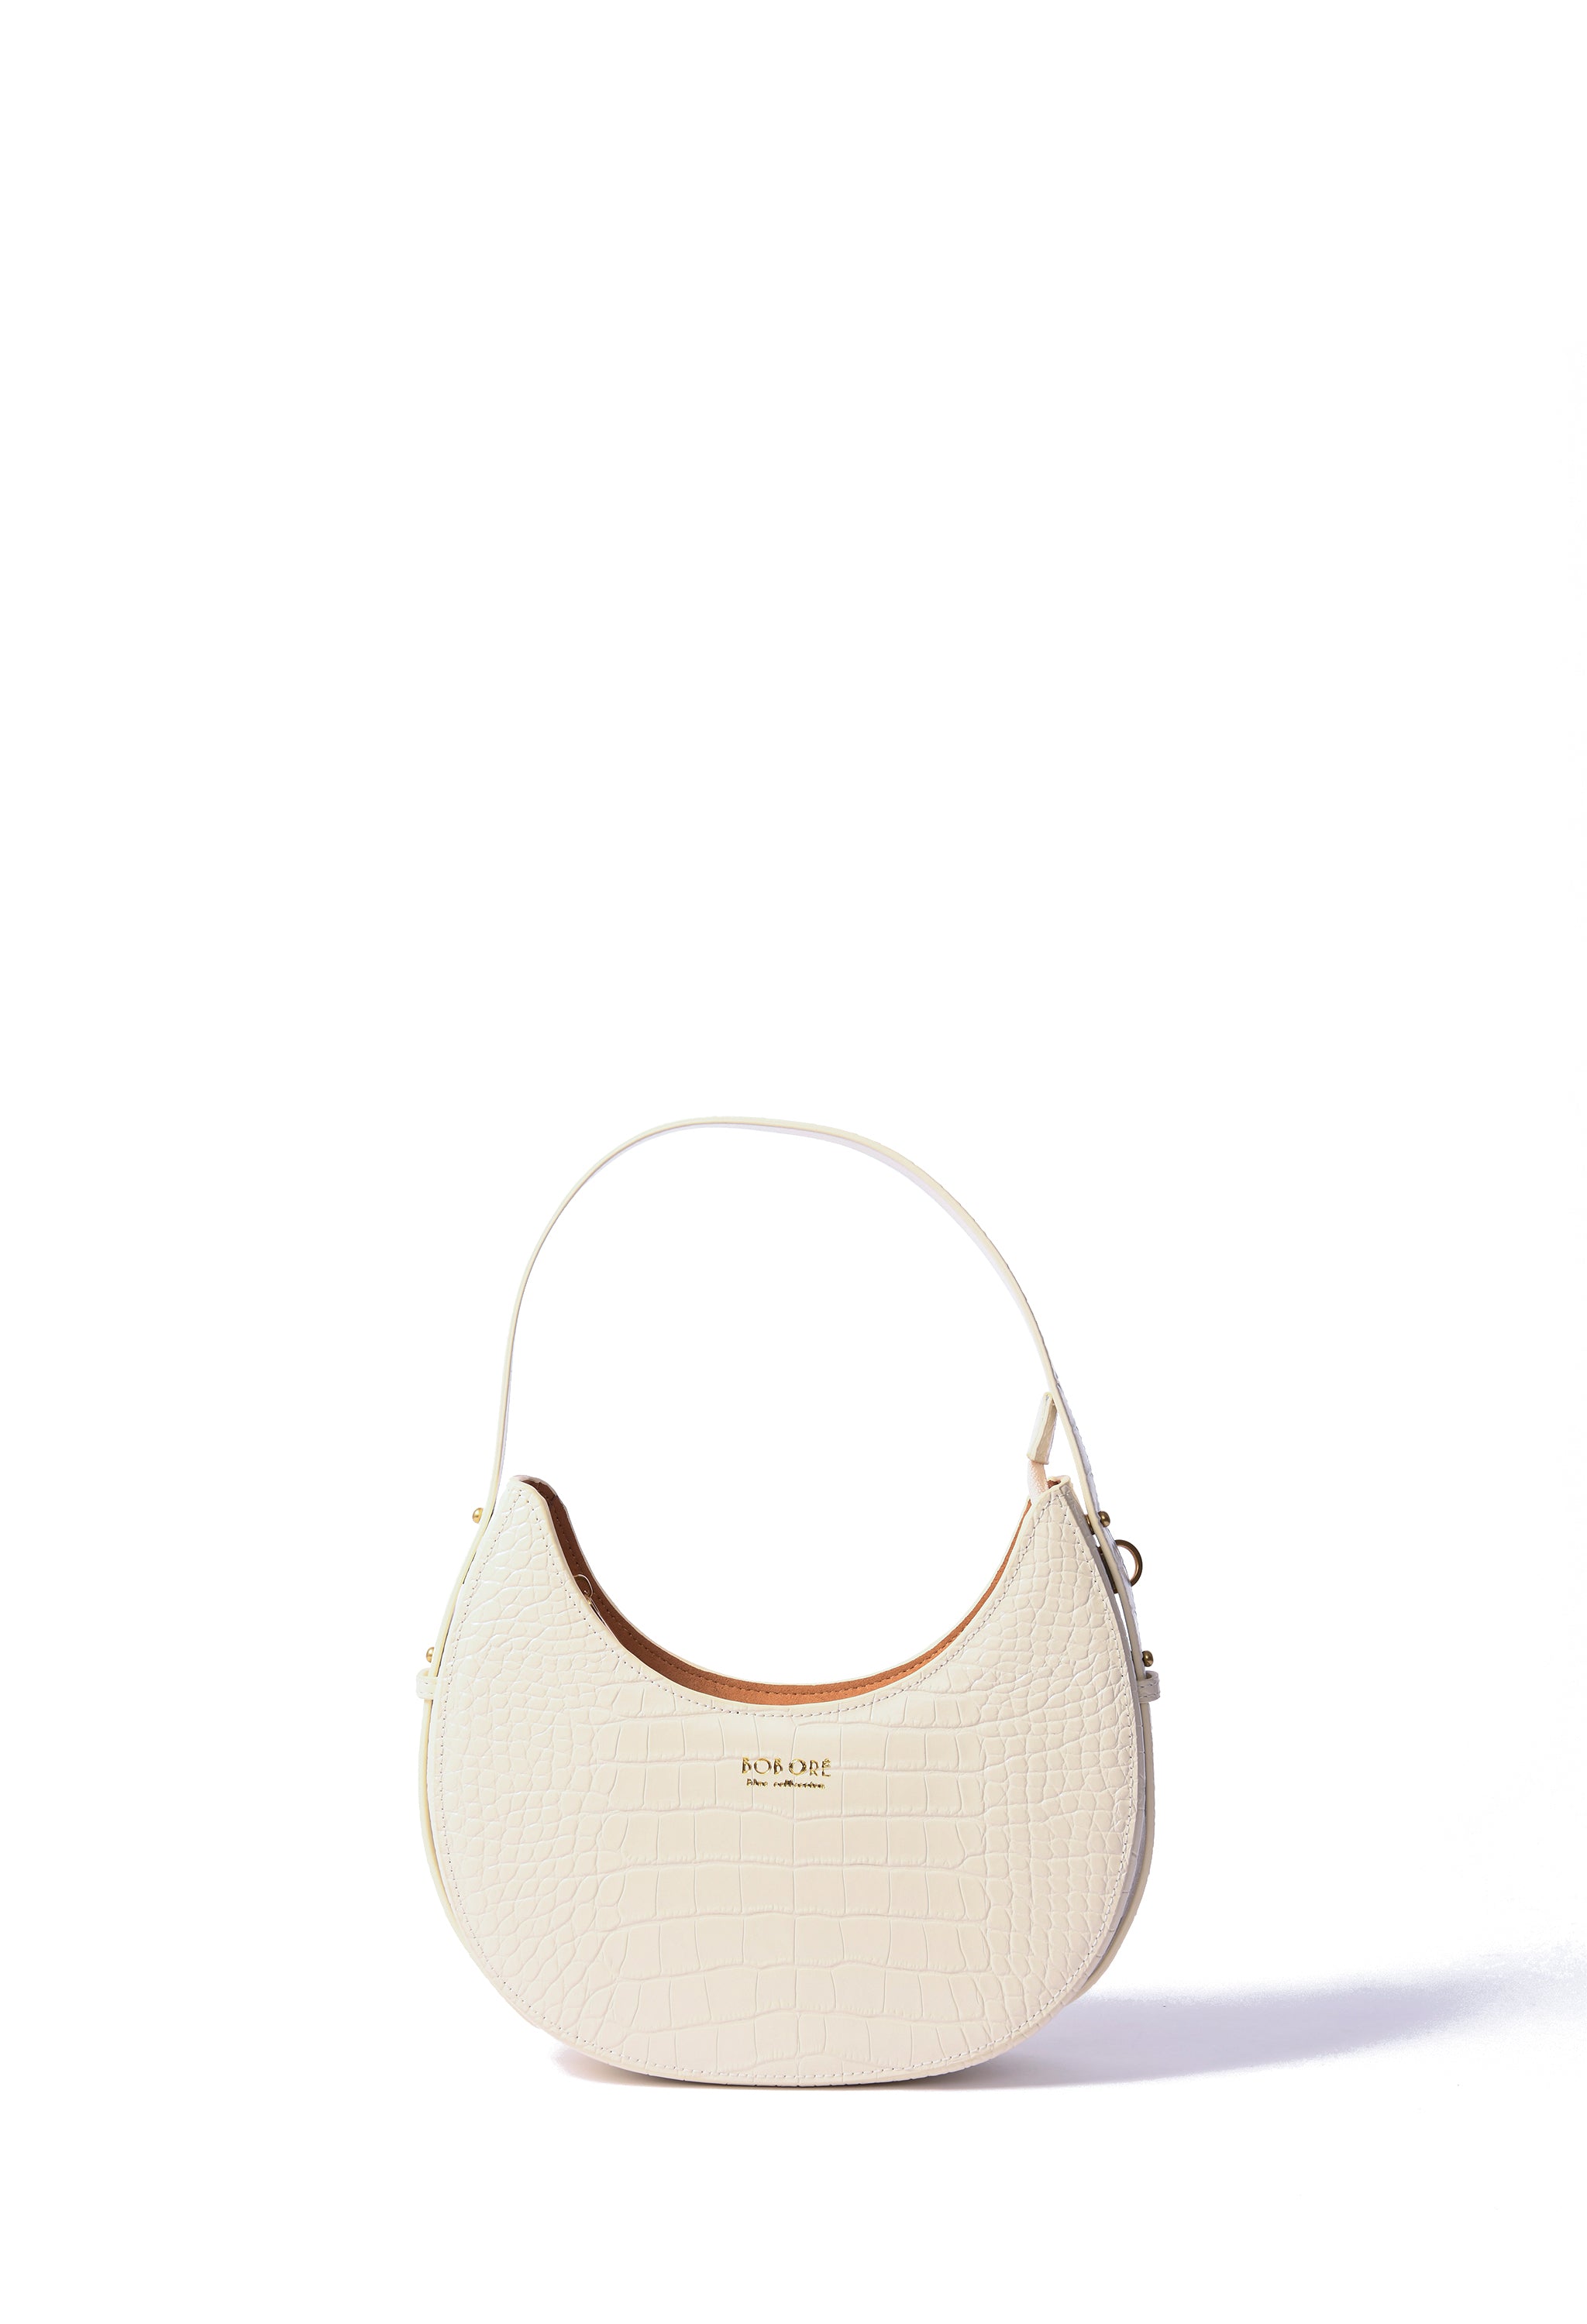 Naomi Moon Bag in croco embossed leather, White BOB ORE blue collection on sale 2022